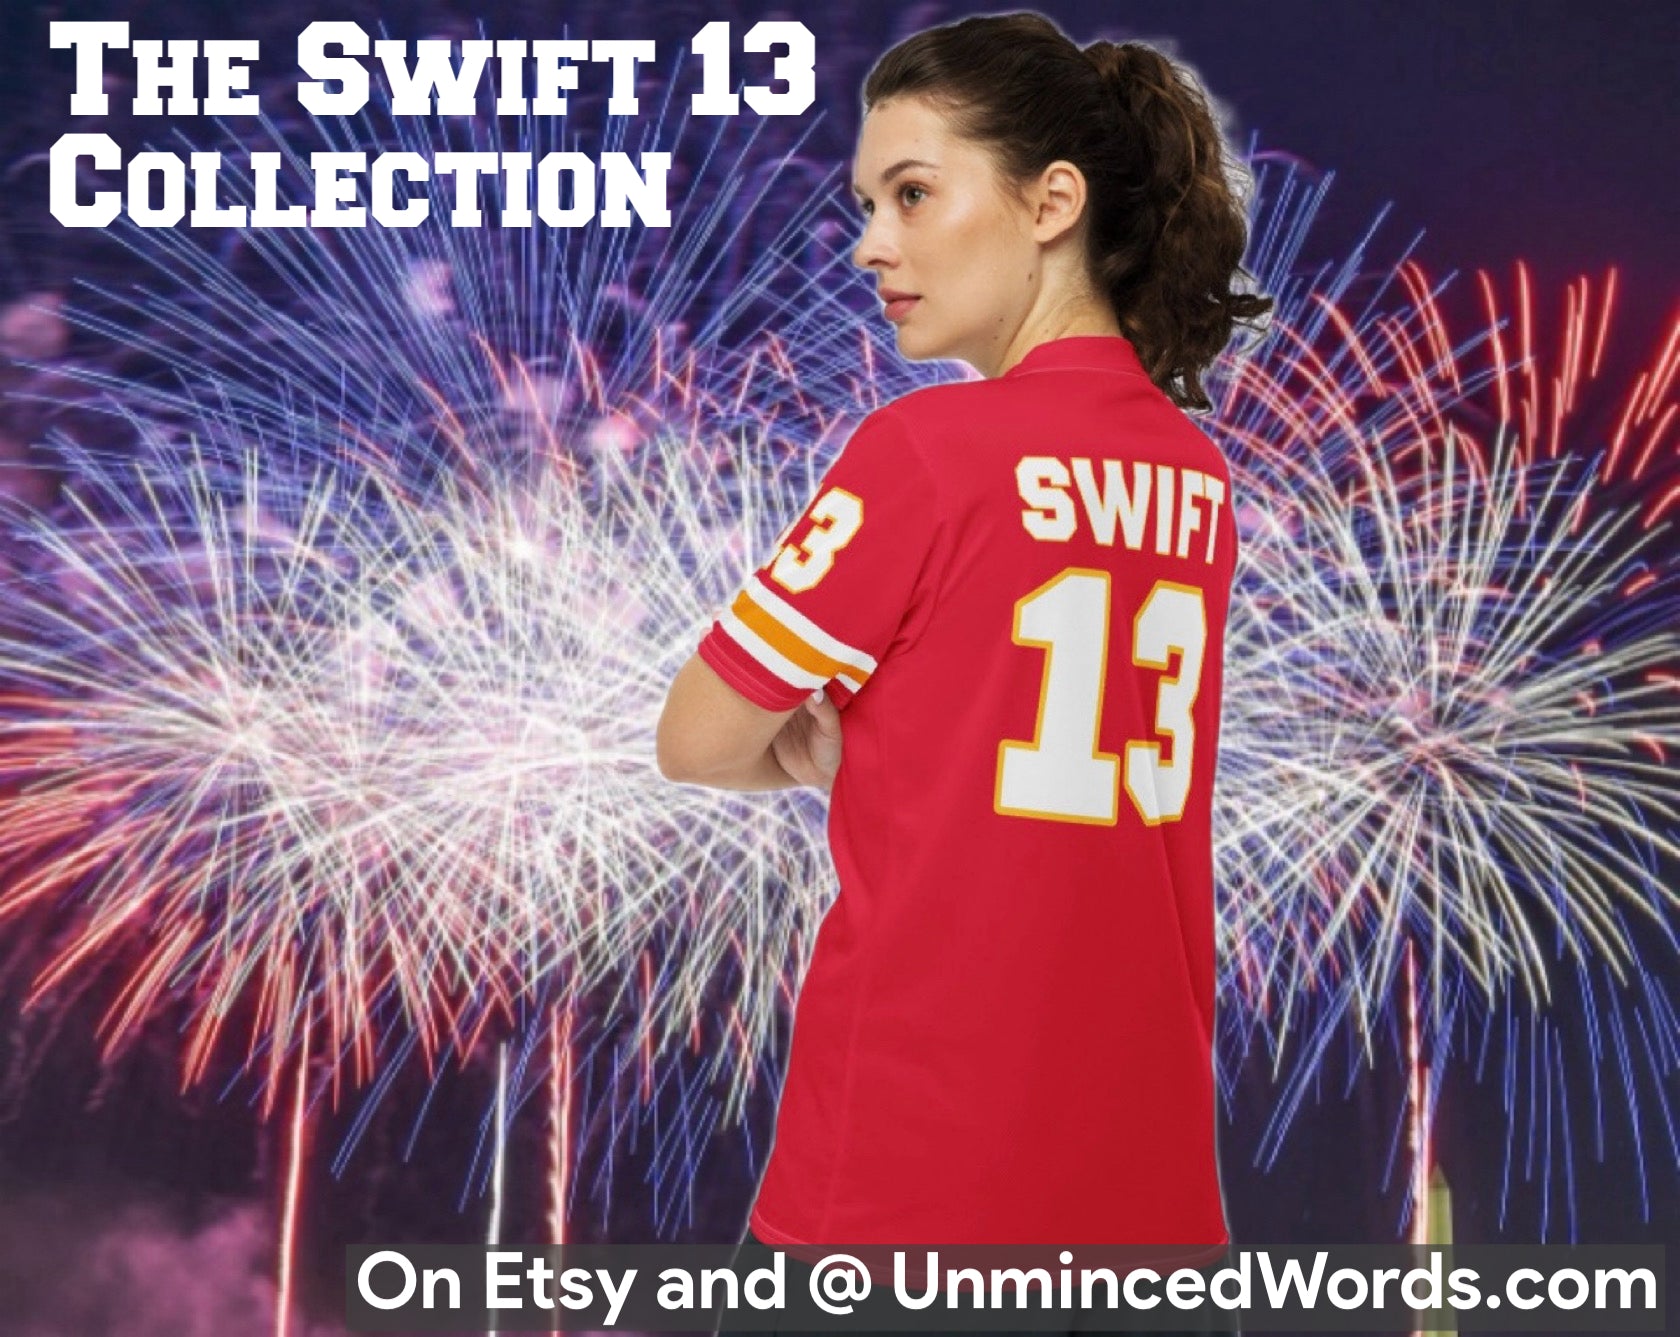 Speaking of Game Time Glow, here’s our Swift 13 Jersey